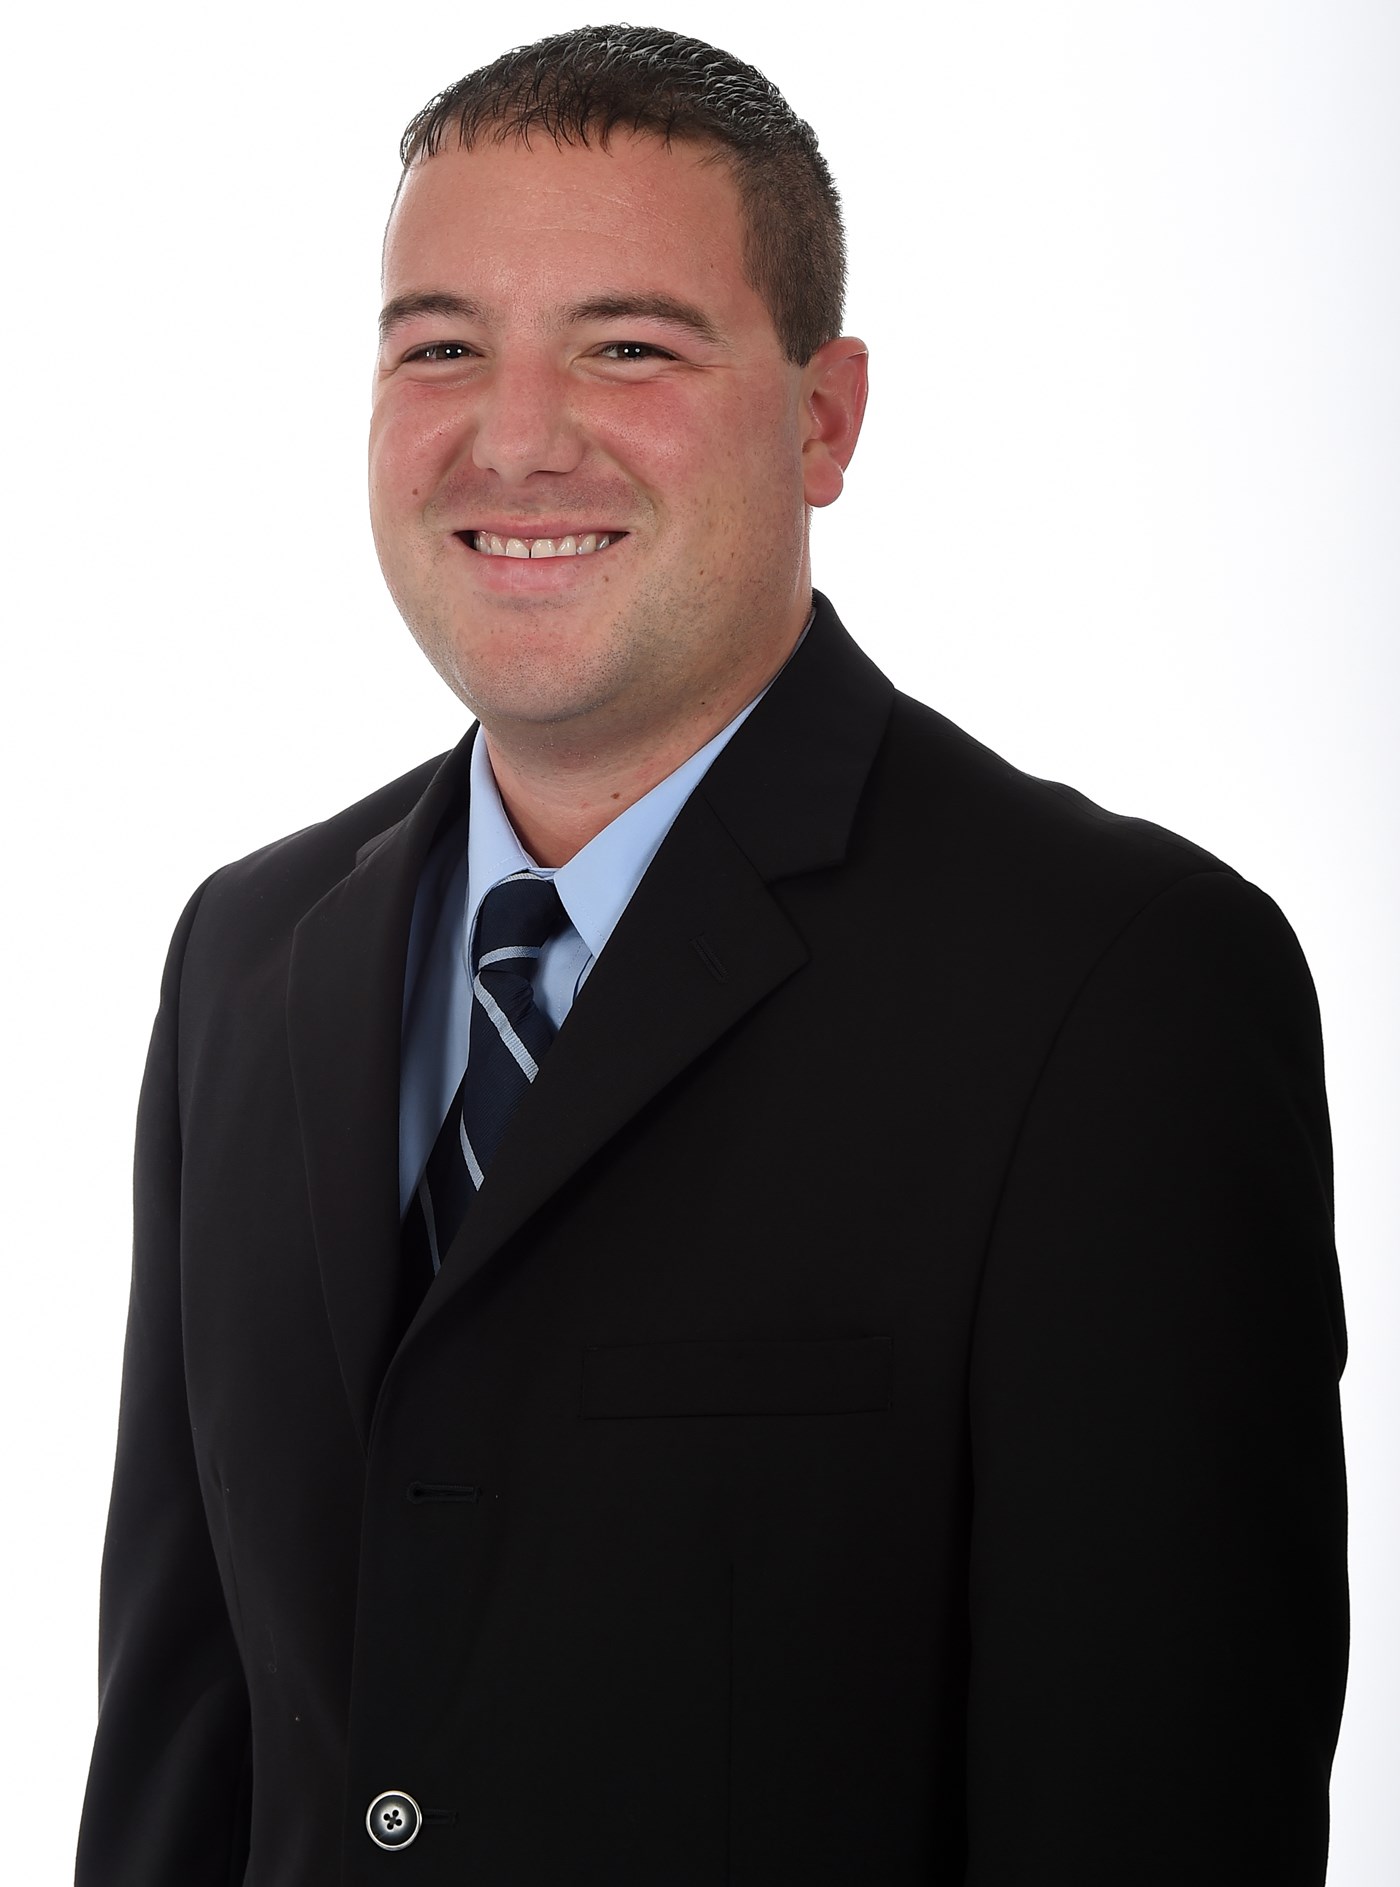 Jonathan Boswell is the Associate Athletic Director for Marketing & Promotions at UMass Lowell.